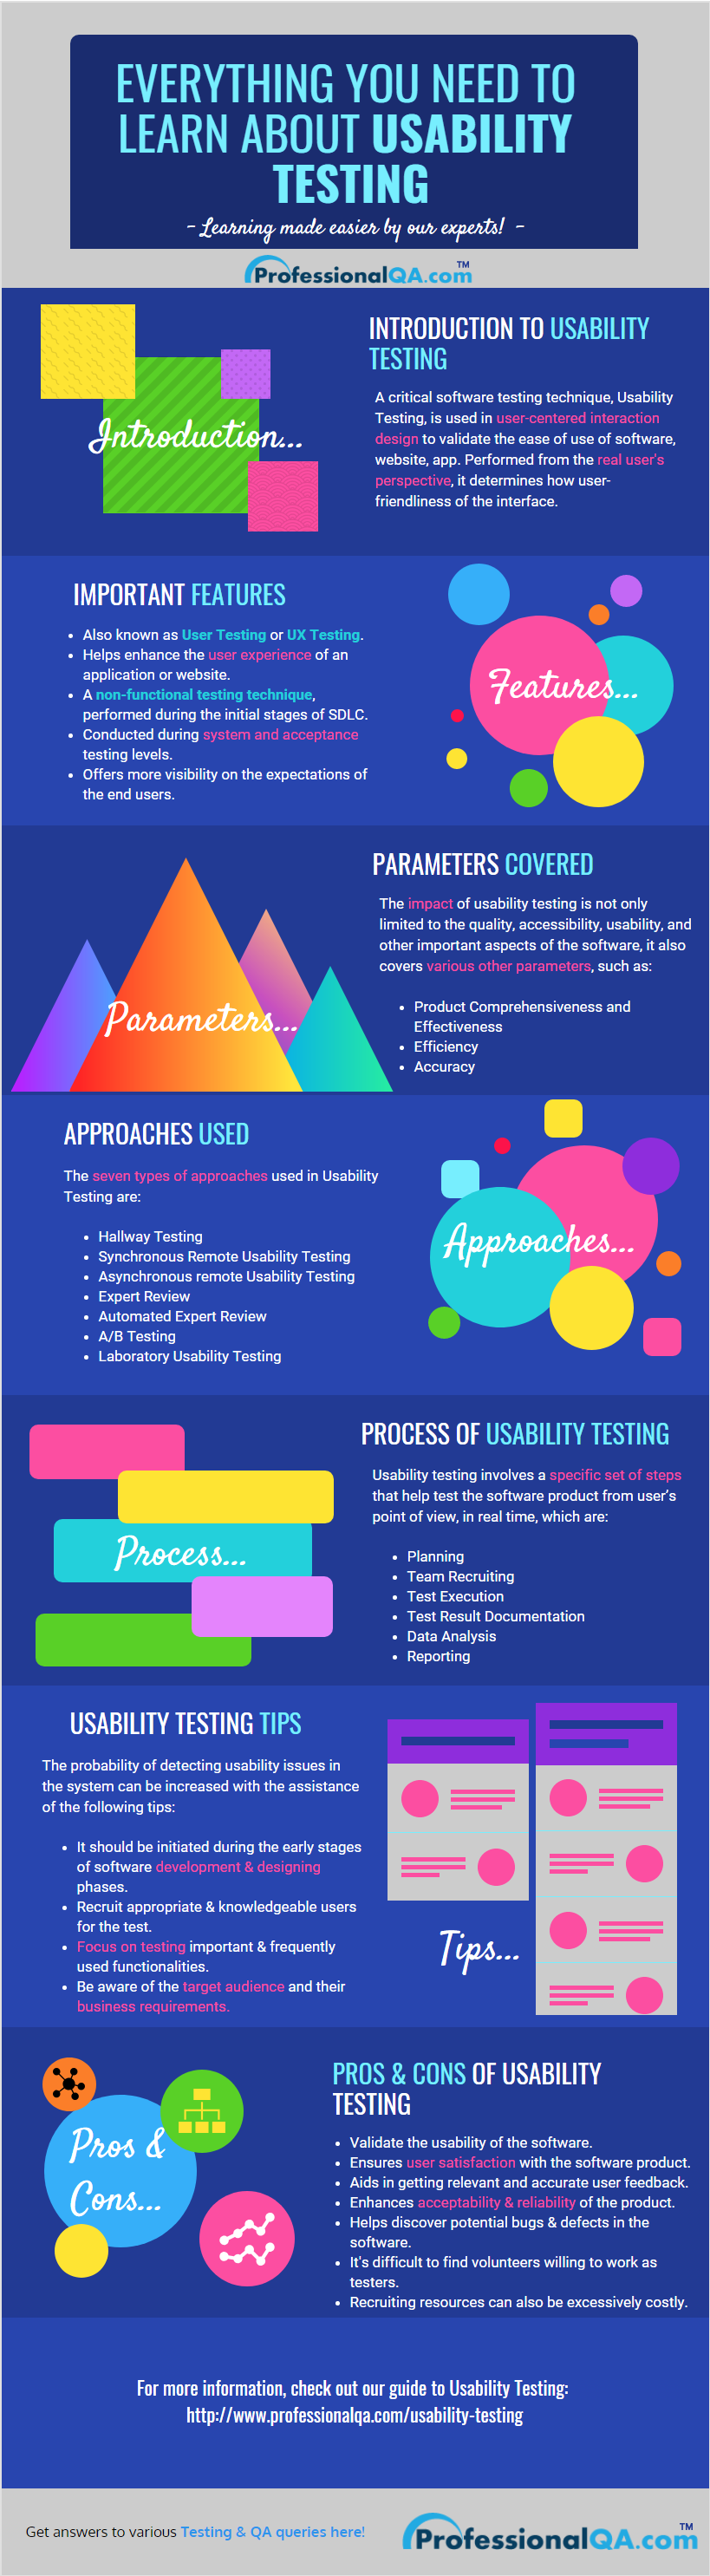 software quality infographic